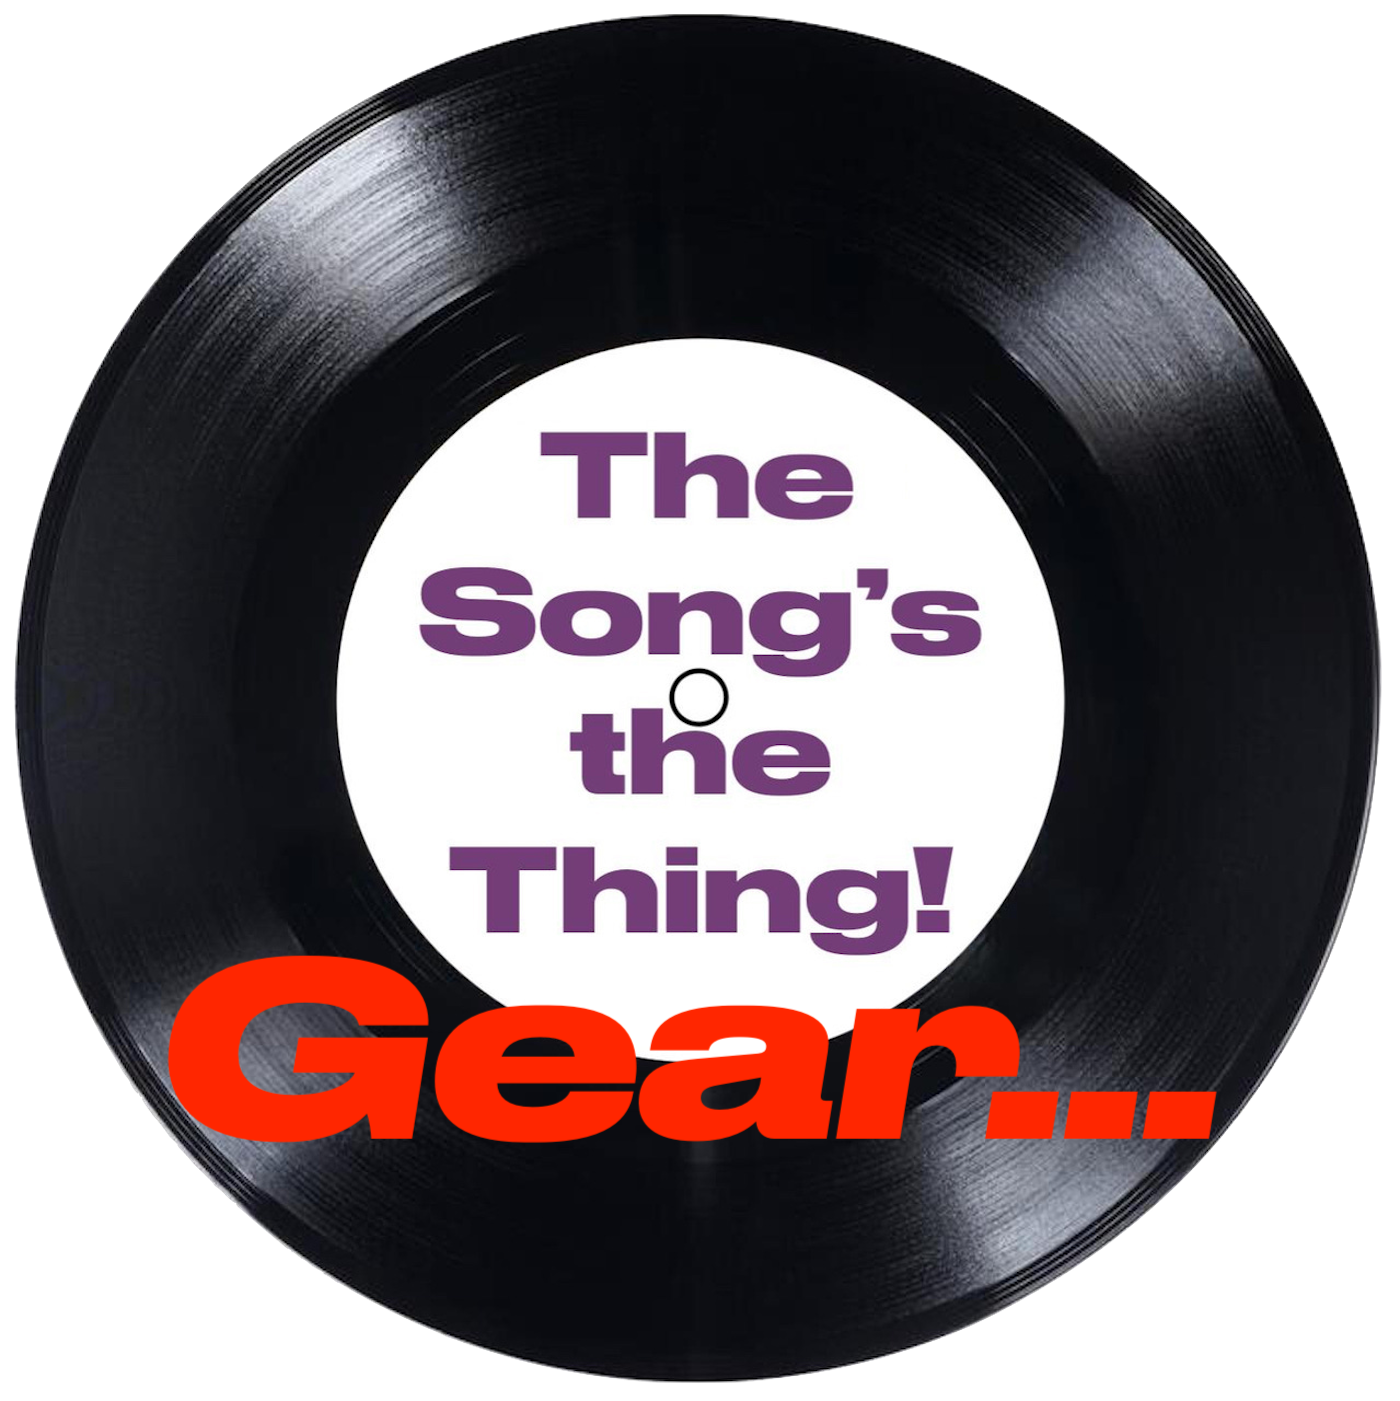 The Song's the Thing! Gear...